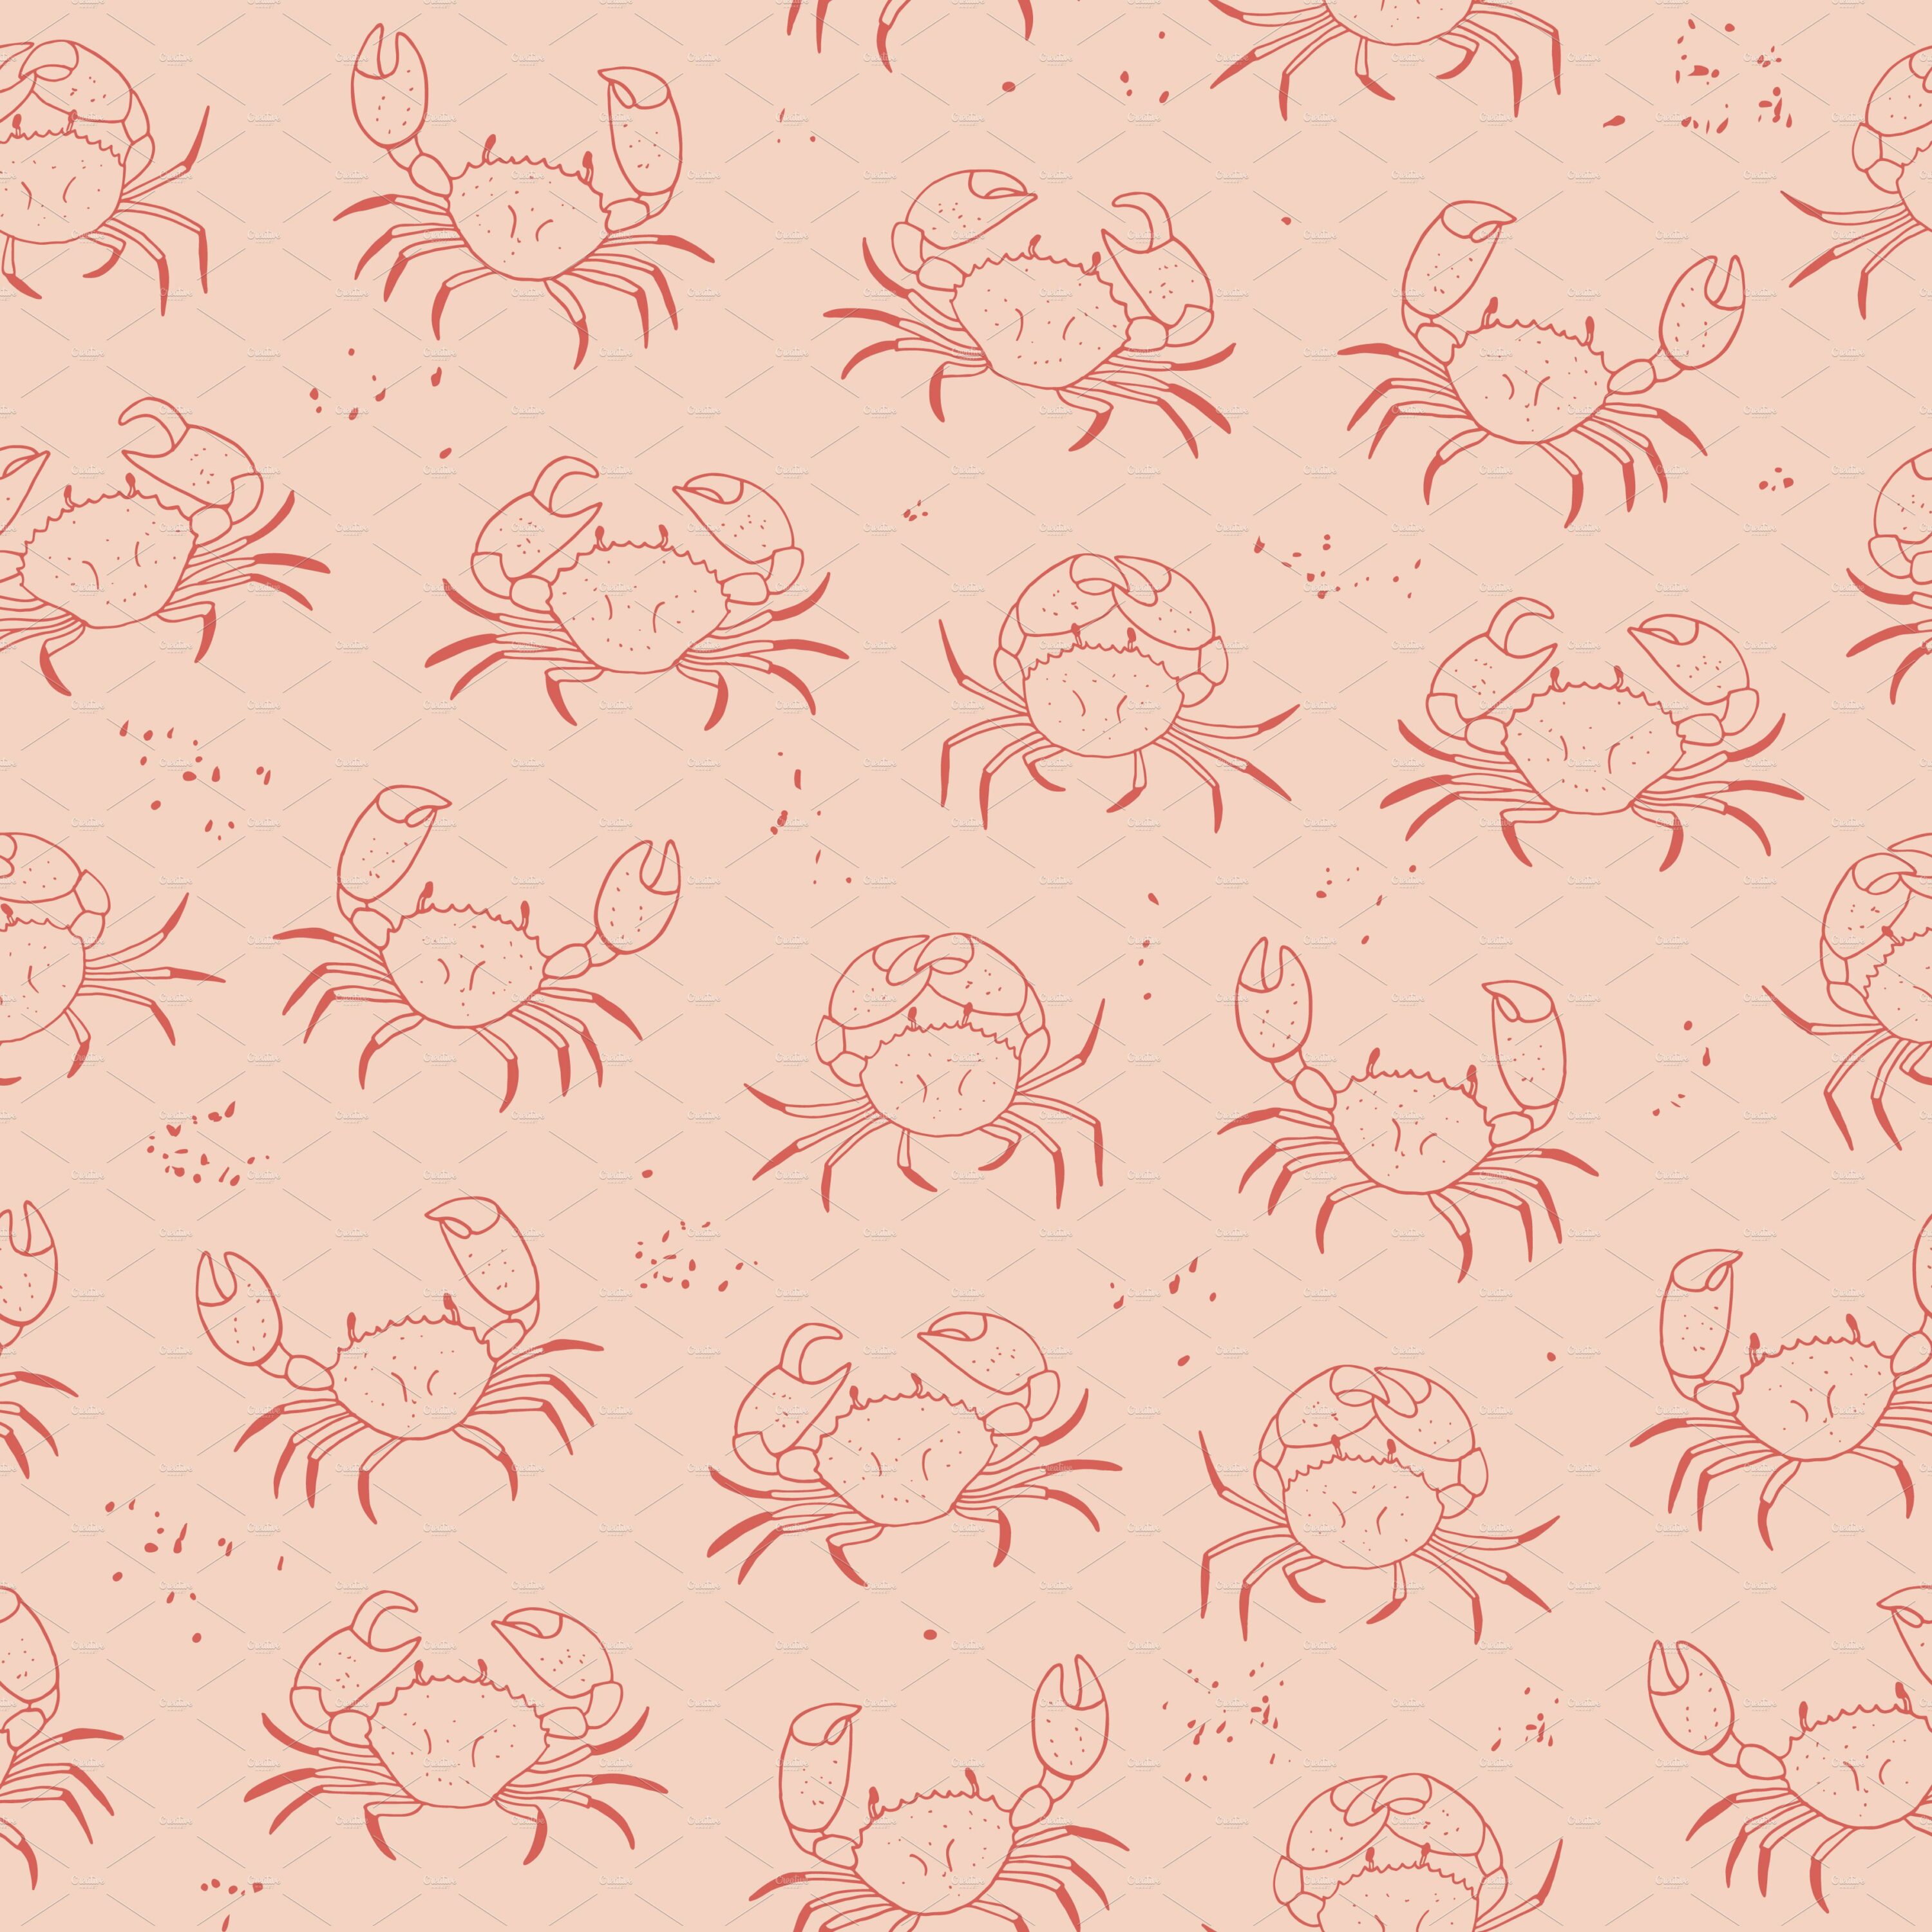 Peach background with outline crabs.